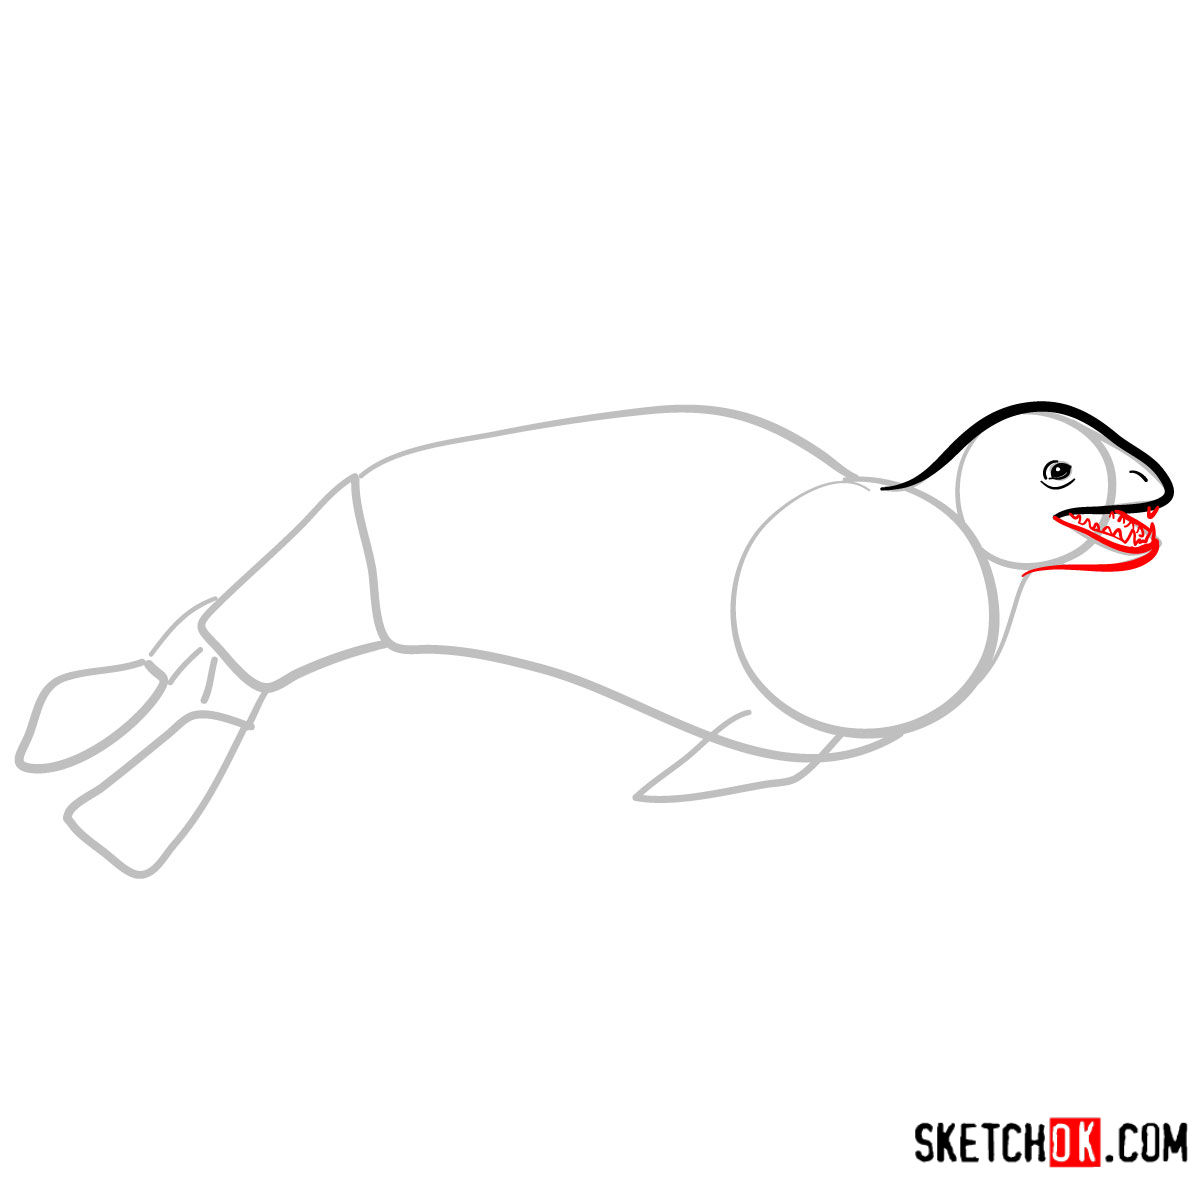 How to draw a Leopard seal Sea Animals Sketchok easy drawing guides